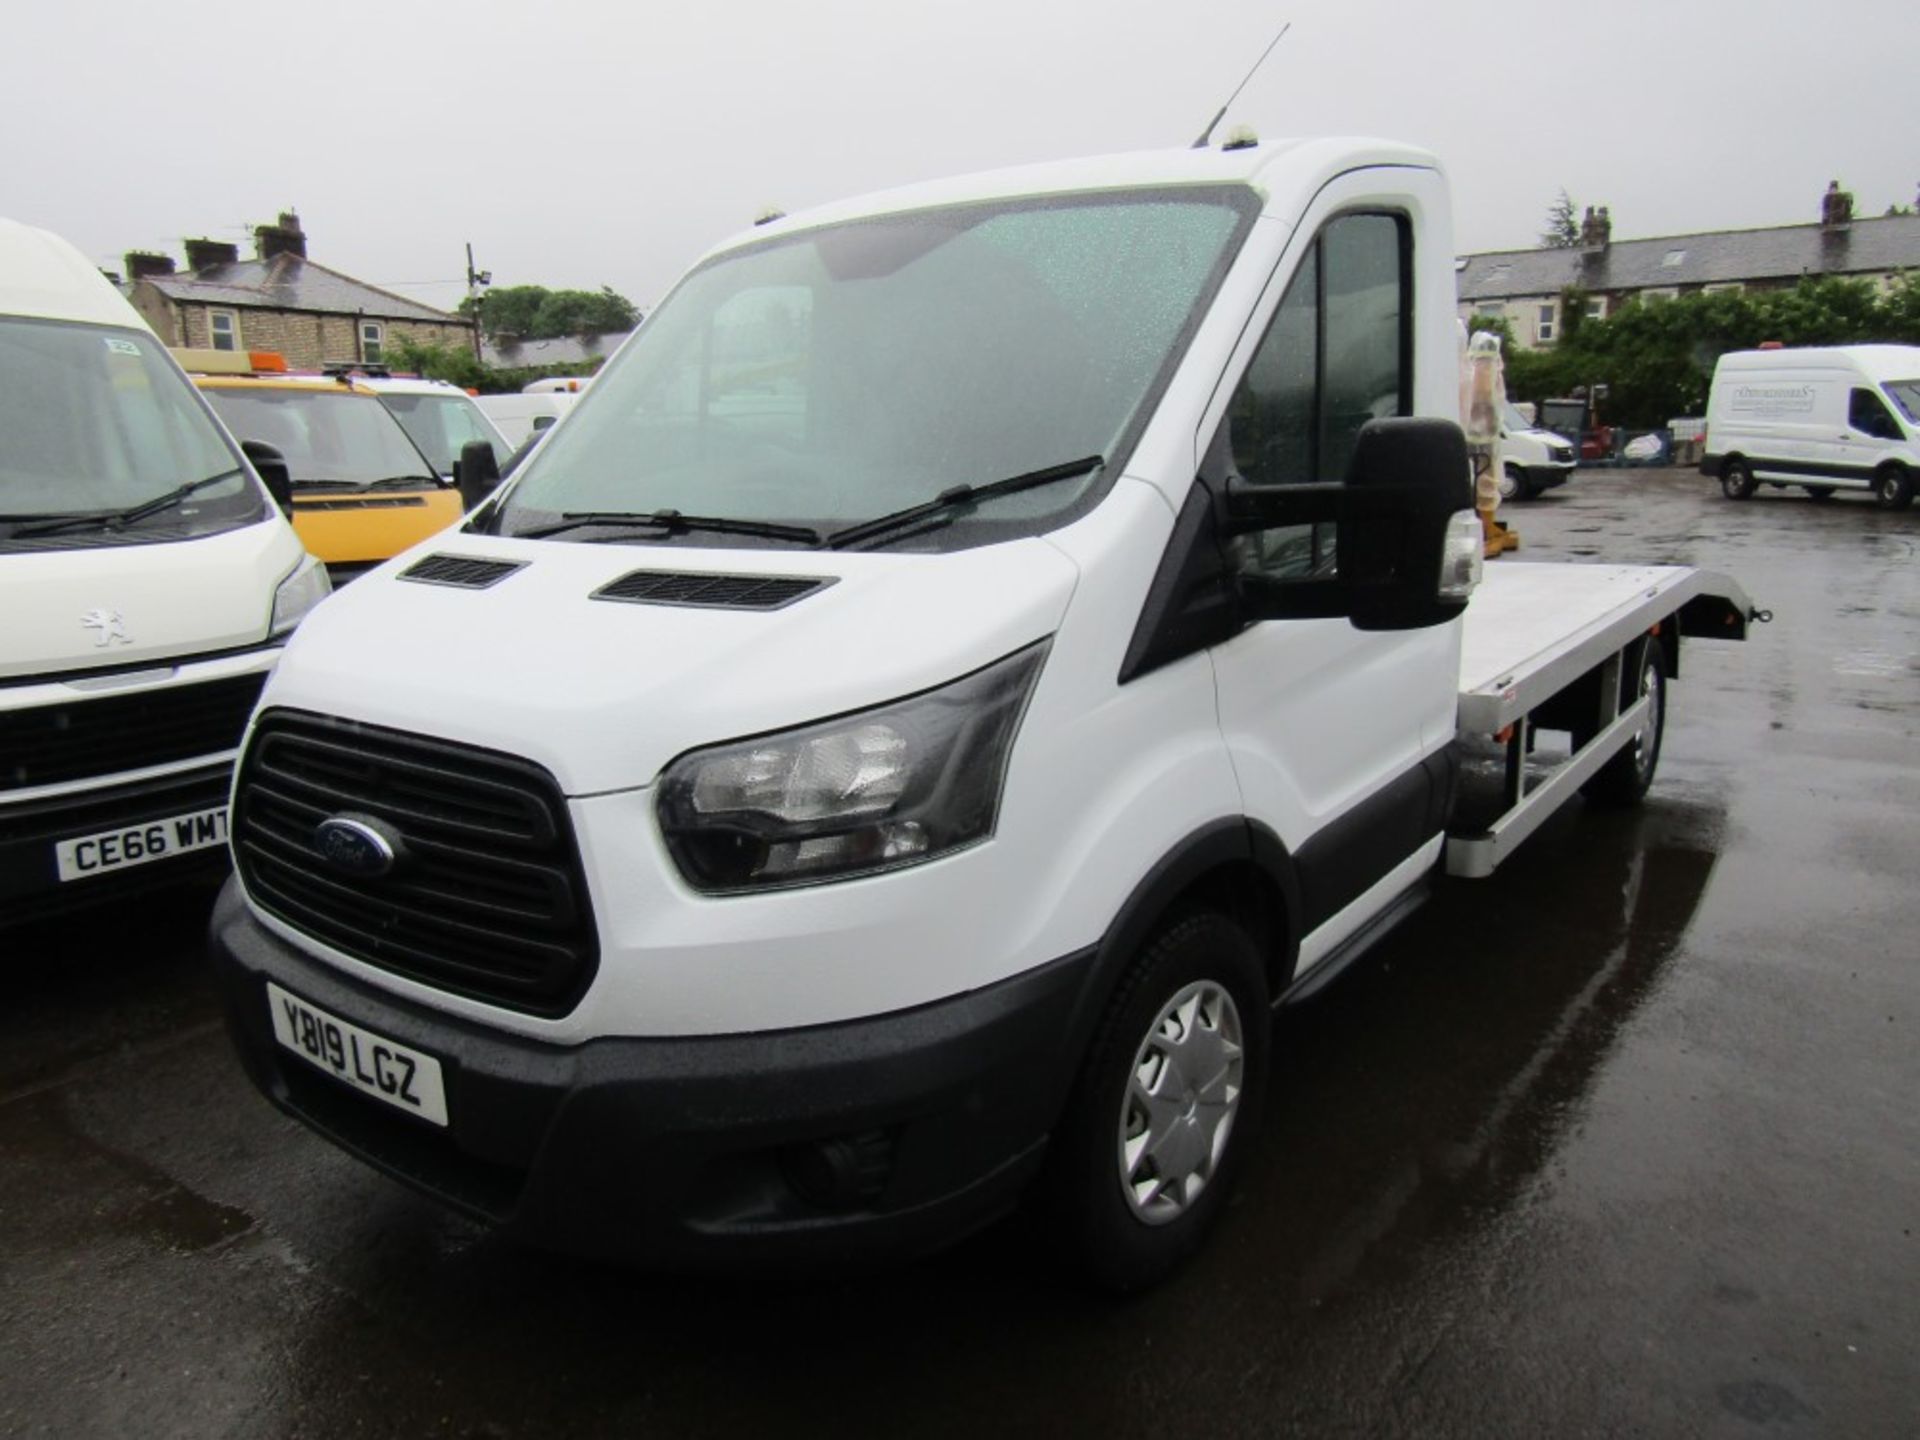 19 reg FORD TRANSIT 350 RECOVERY UNIT NISSAN BODY & WINCH, 1ST REG 06/19, 51931M WARRANTED, V5 HERE, - Image 2 of 6